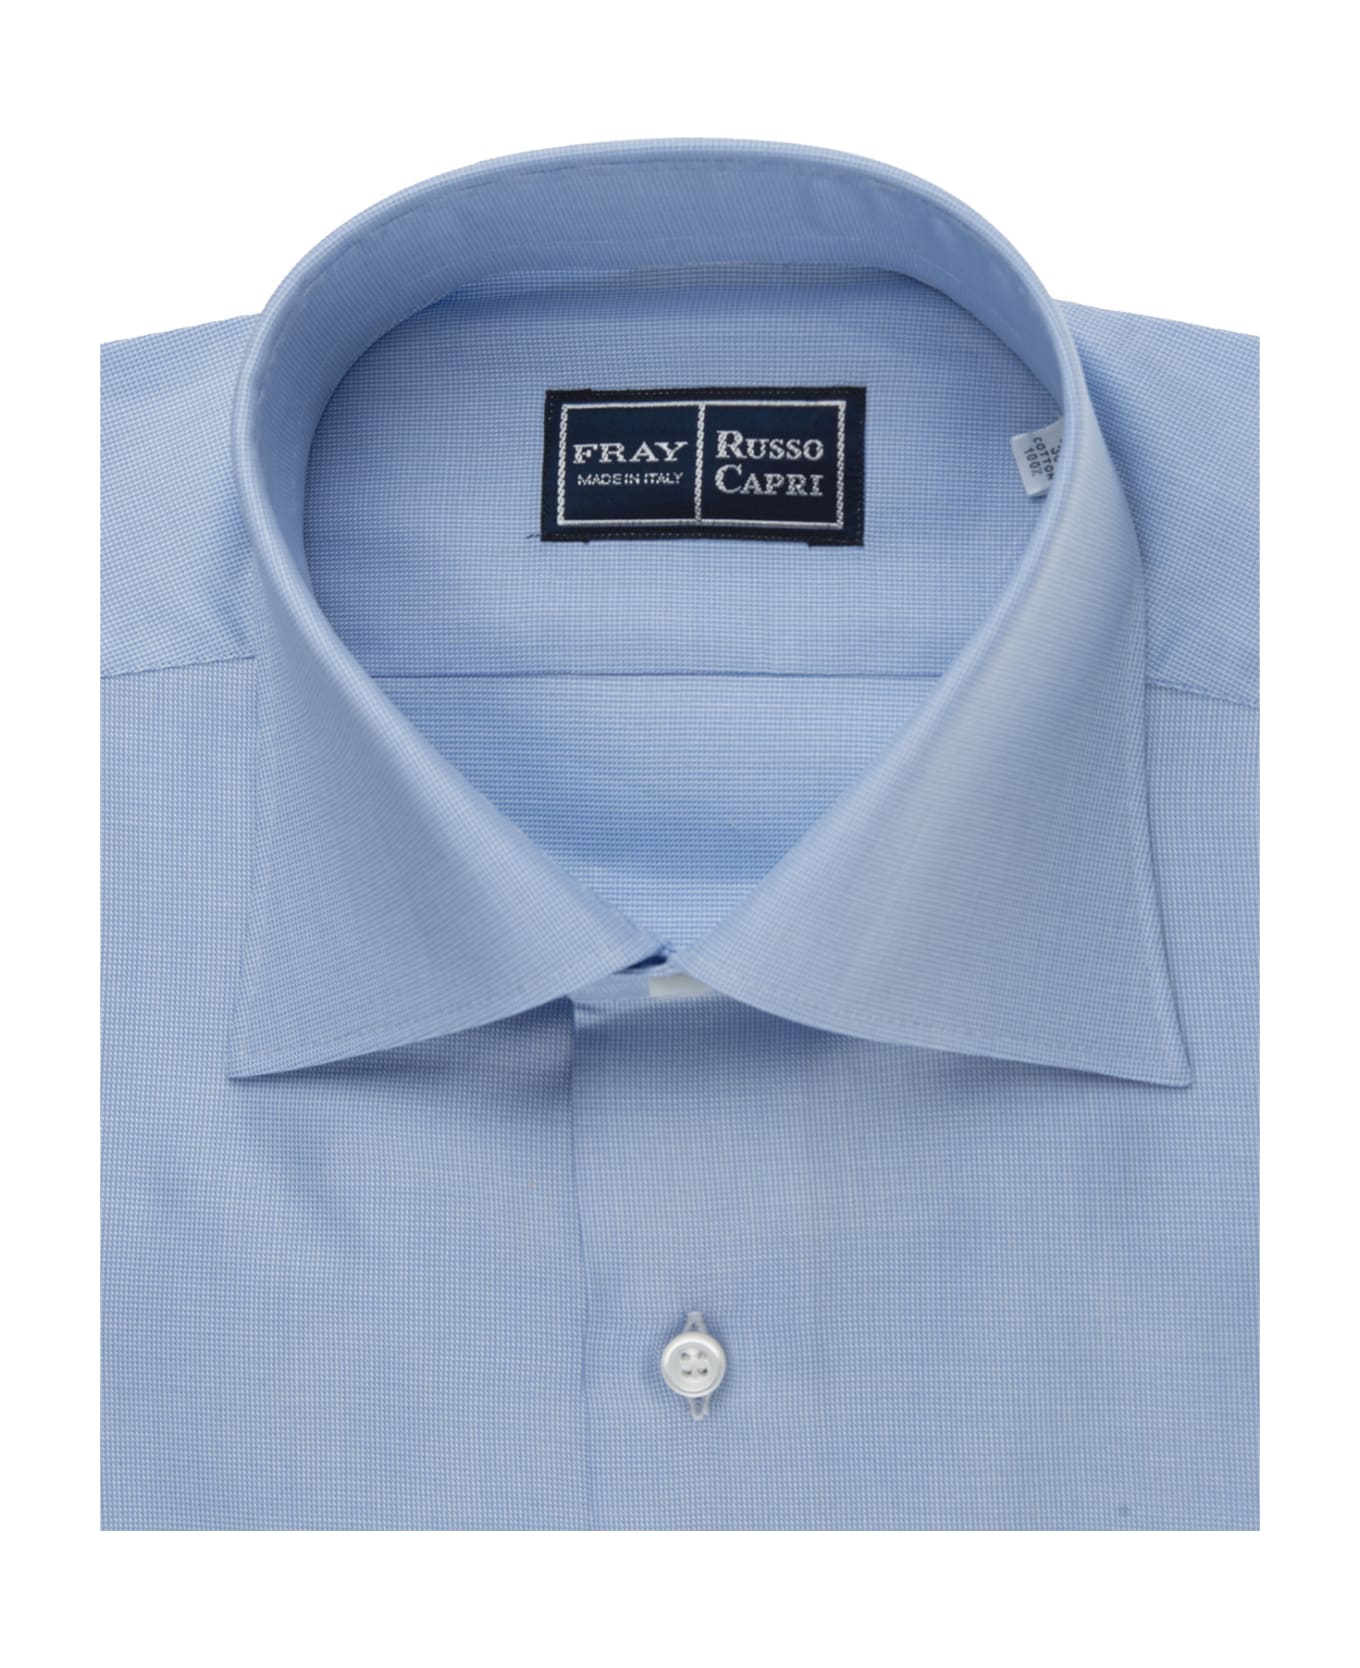 Fray Regular Fit Shirt In padded Blue Oxford Cotton - Blue